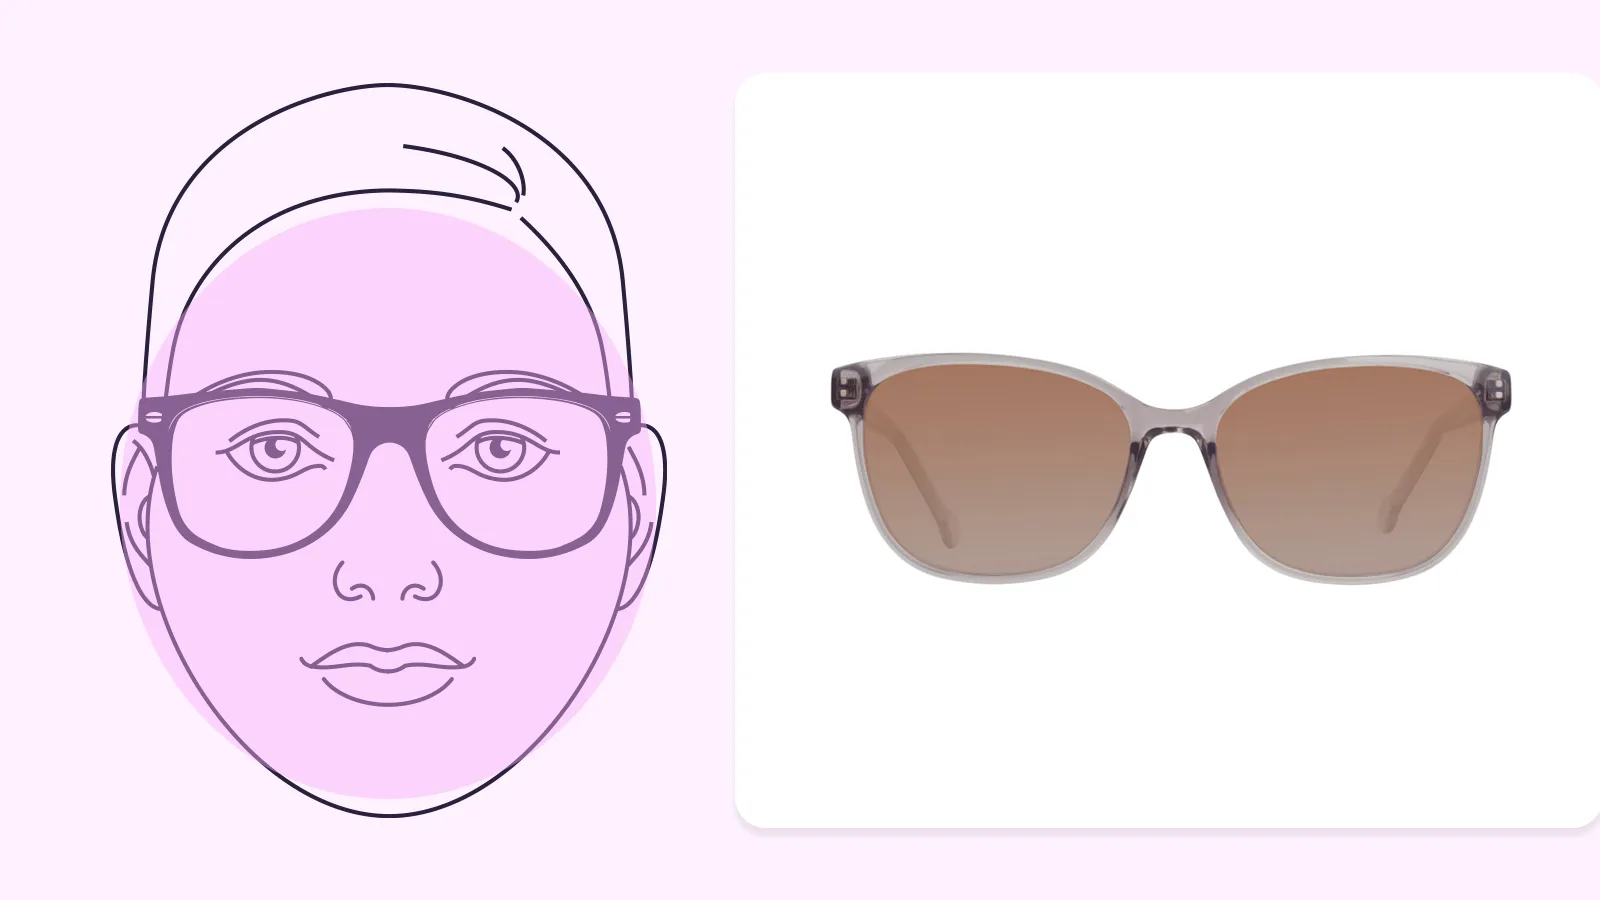 How to choose right sunglasses for your face shape?